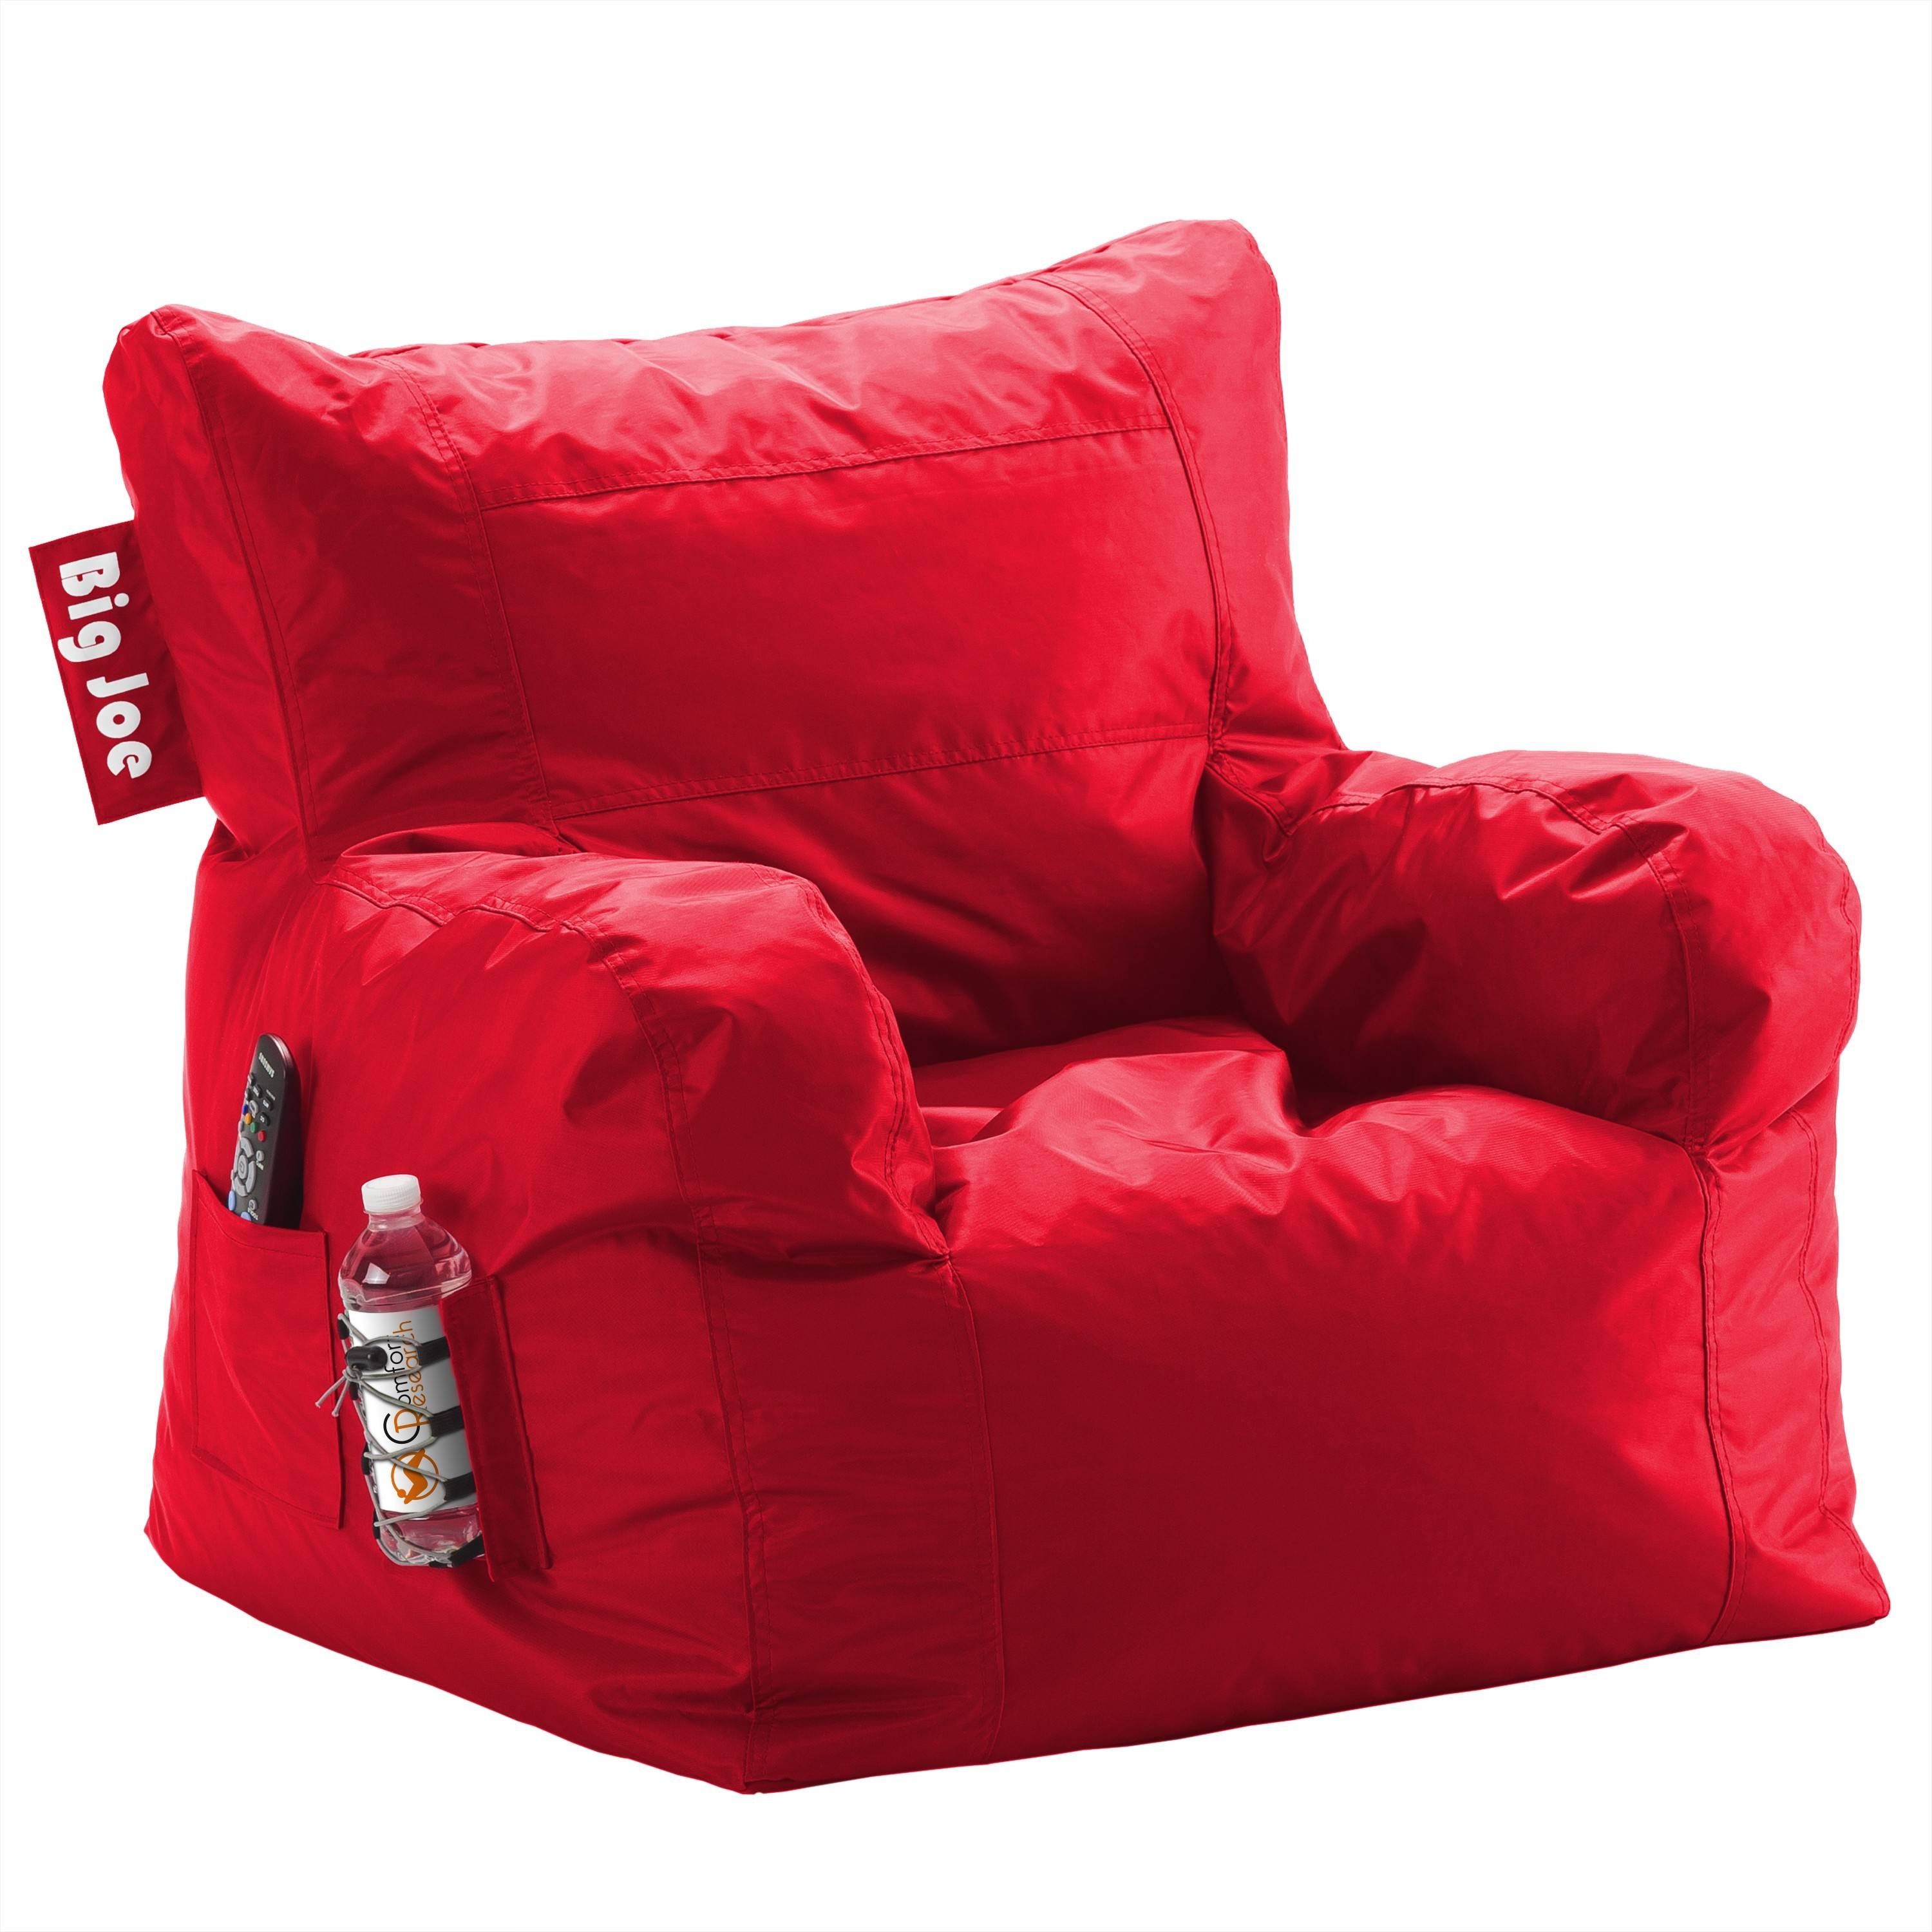 Bean Bag Sofa Evolution Toro Redambient Lounge – Gallery Image Throughout Bean Bag Sofas And Chairs (View 11 of 15)